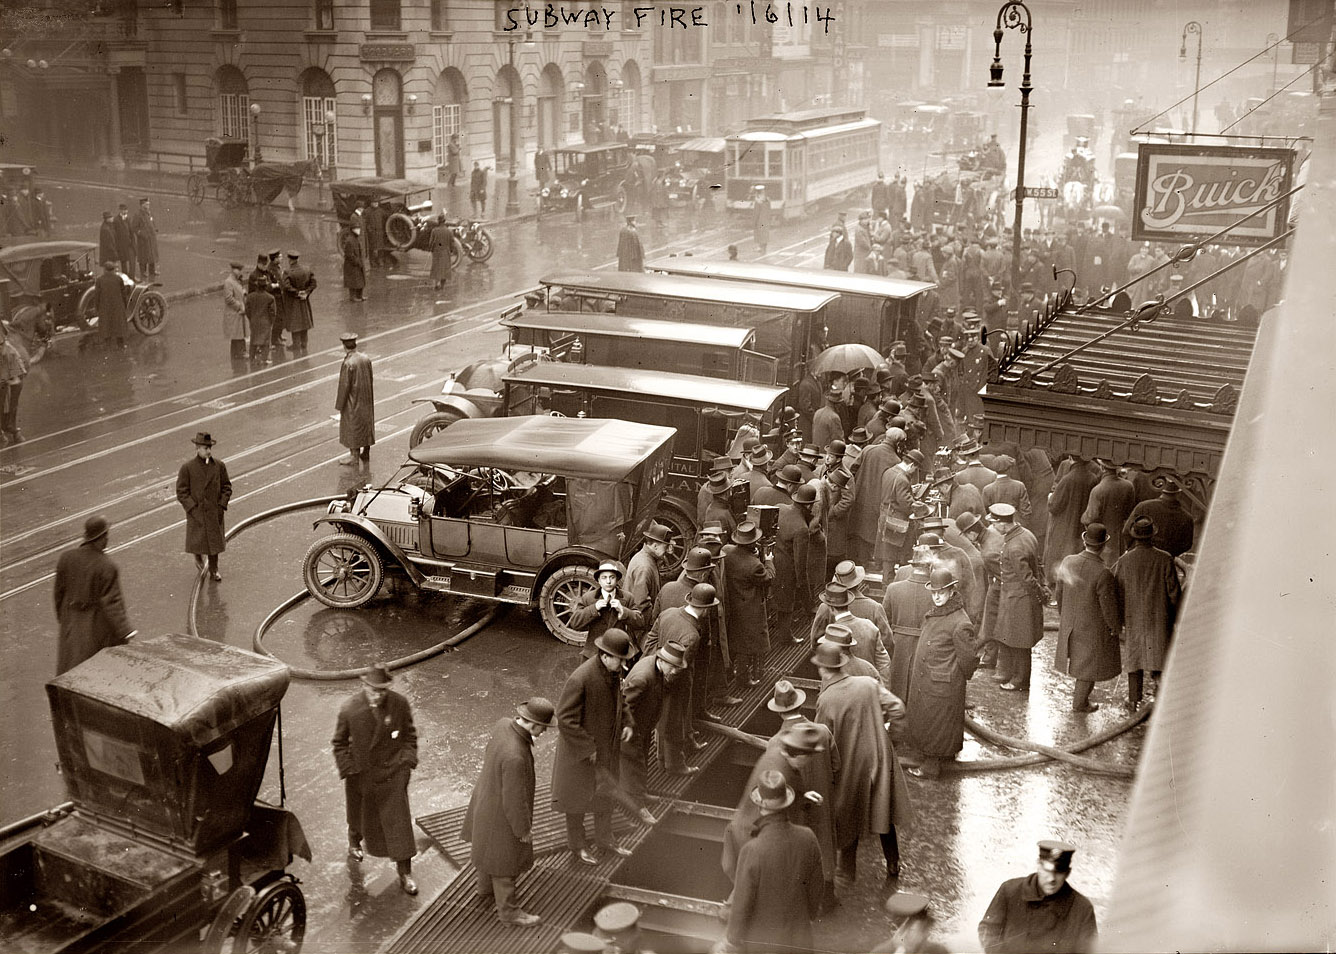 On January 6, 1915, an electrical short in a manhole started a fire that filled the subway line under Broadway at West 55th Street with smoke, resulting in chaos for a quarter-million commuters. The New York Times reported that one person, Ella Grady, was killed. We note that photographer George Grantham Bain, like many of us writing checks just after January 1, was a year off in dating this photo. View full size. 5x7 glass negative, George Grantham Bain Collection.